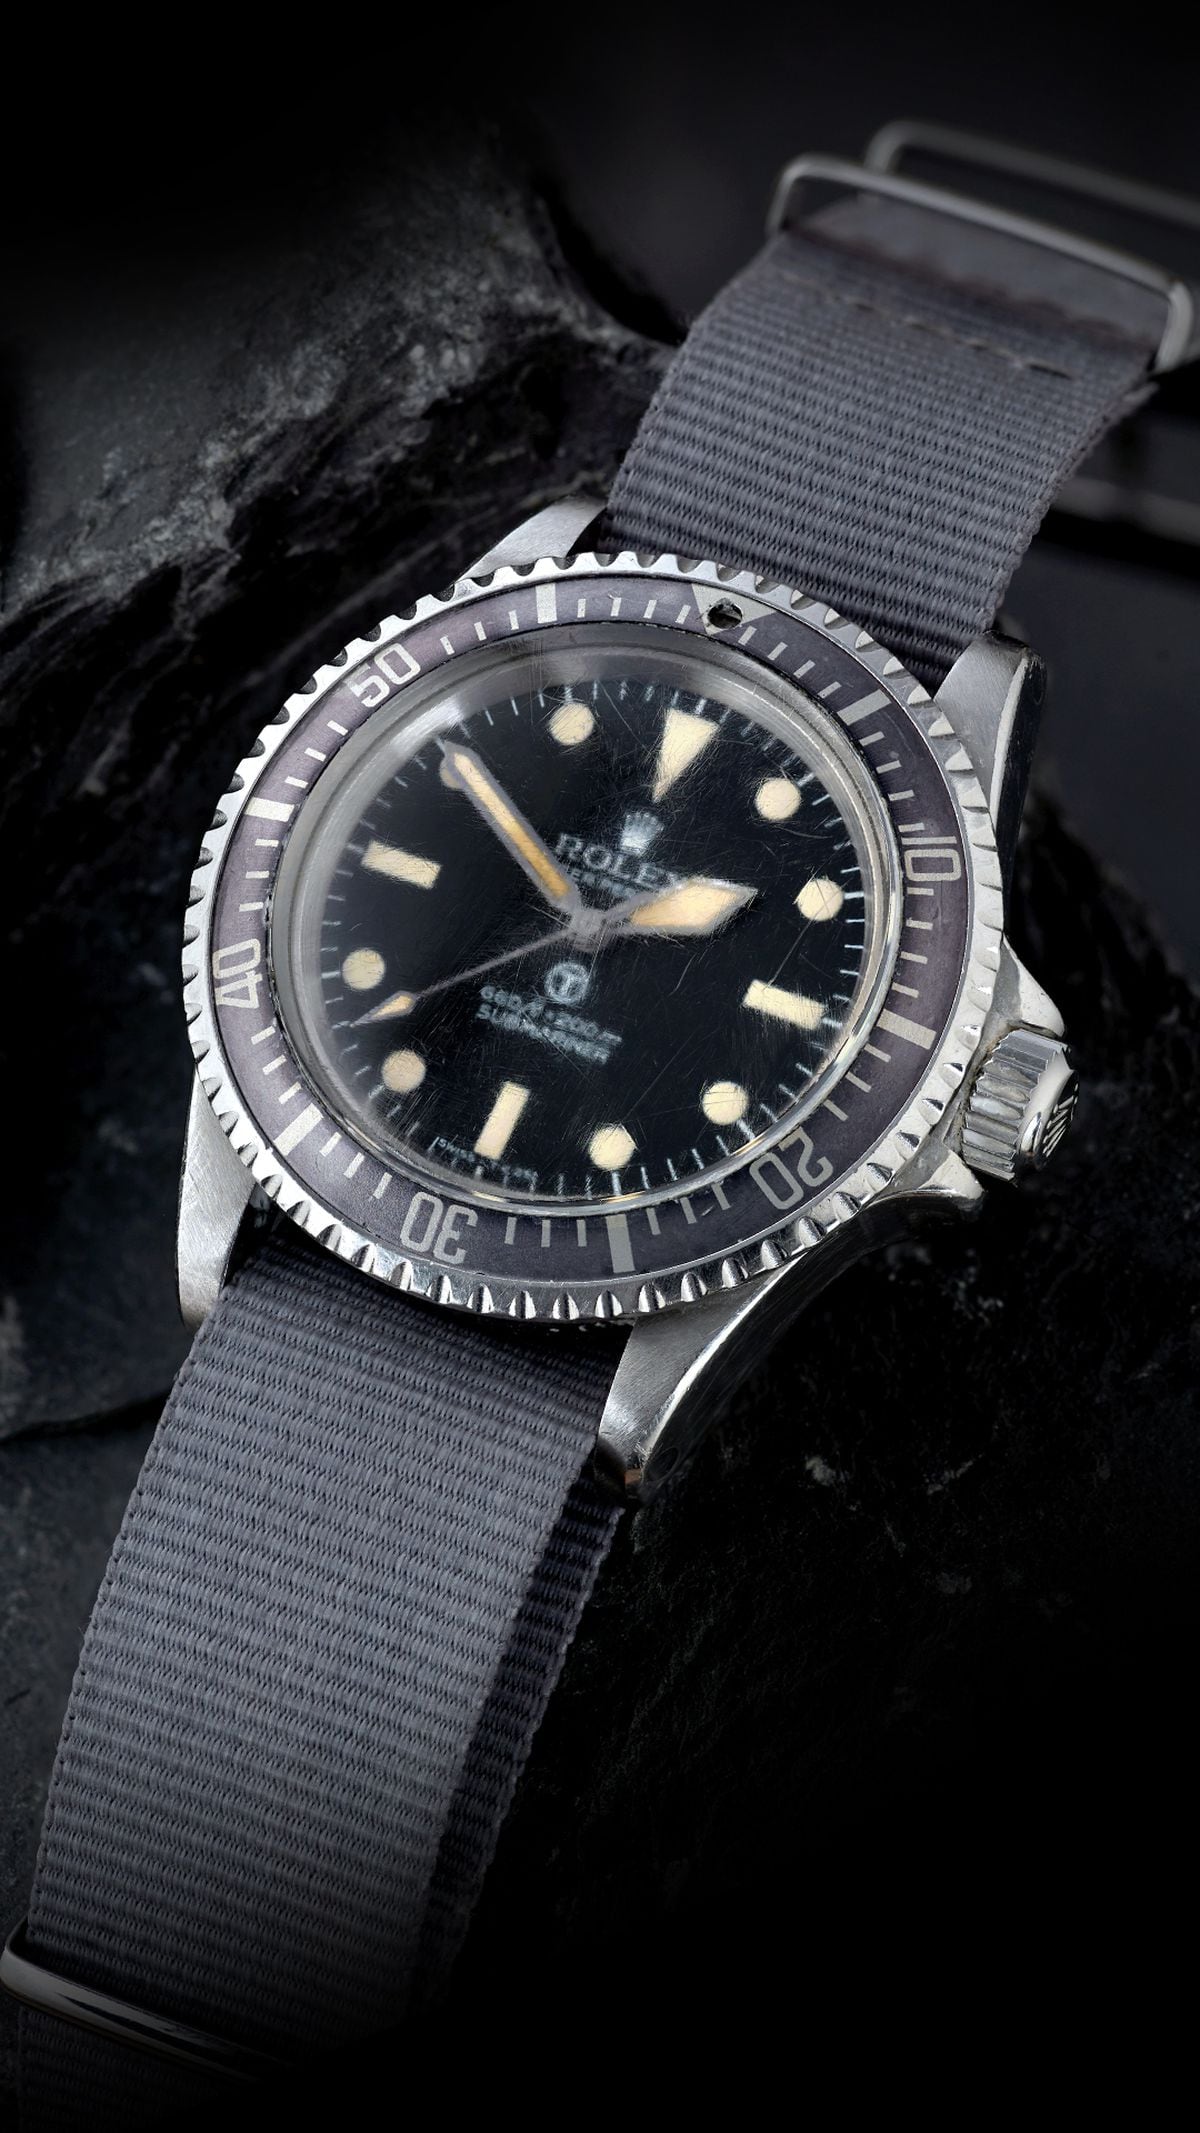   The Rolex Military Submariner. Photo: Fellows Auctioneers